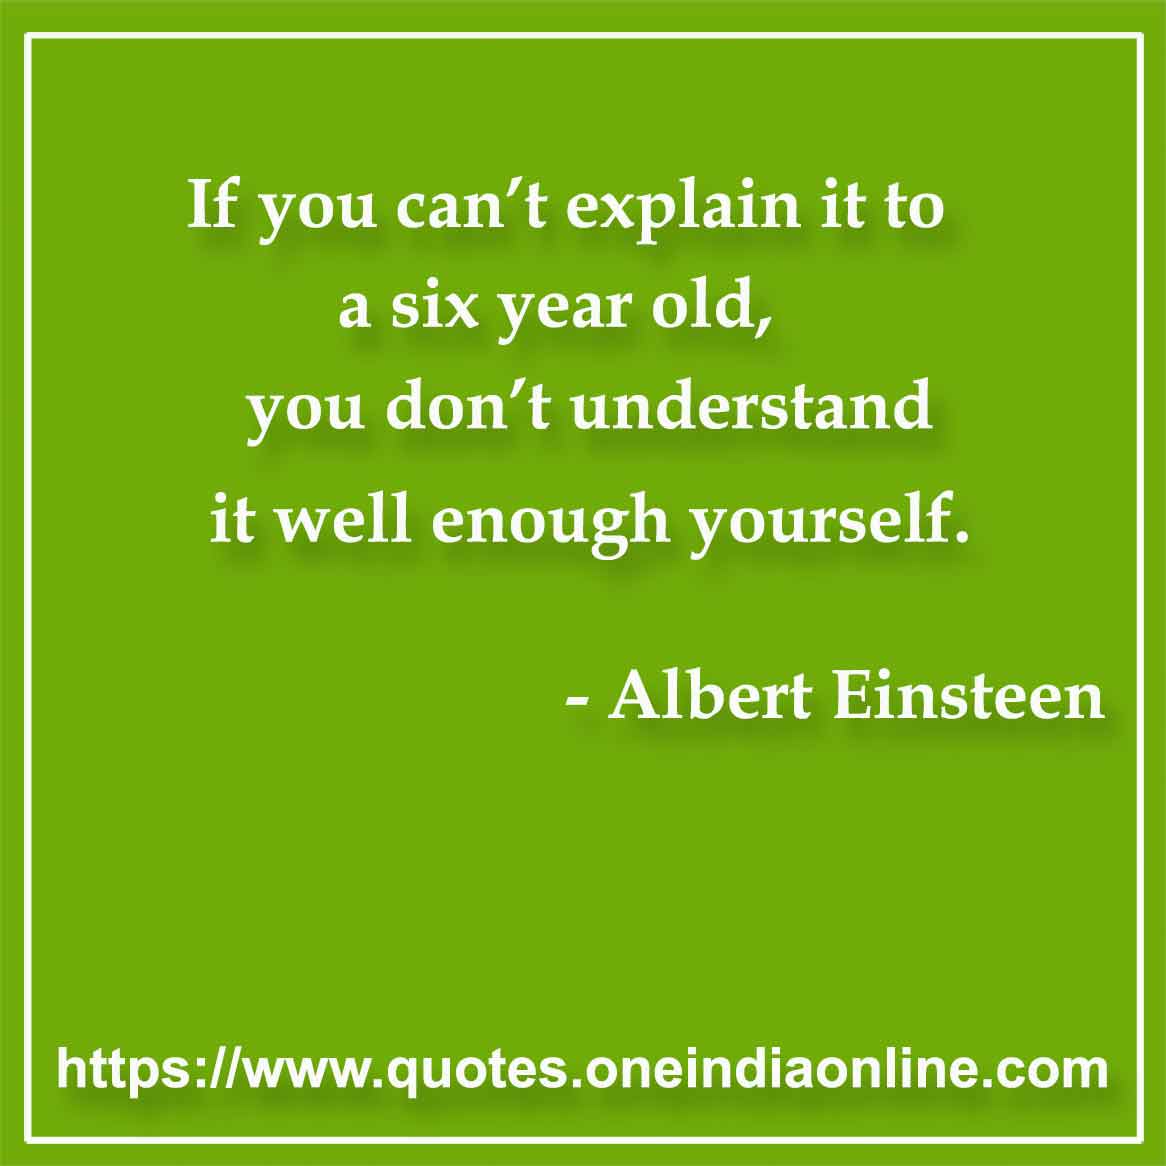 If you can’t explain it to a six year old, you don’t understand it well enough yourself.

- Advertising Quotes by Albert Einsteen